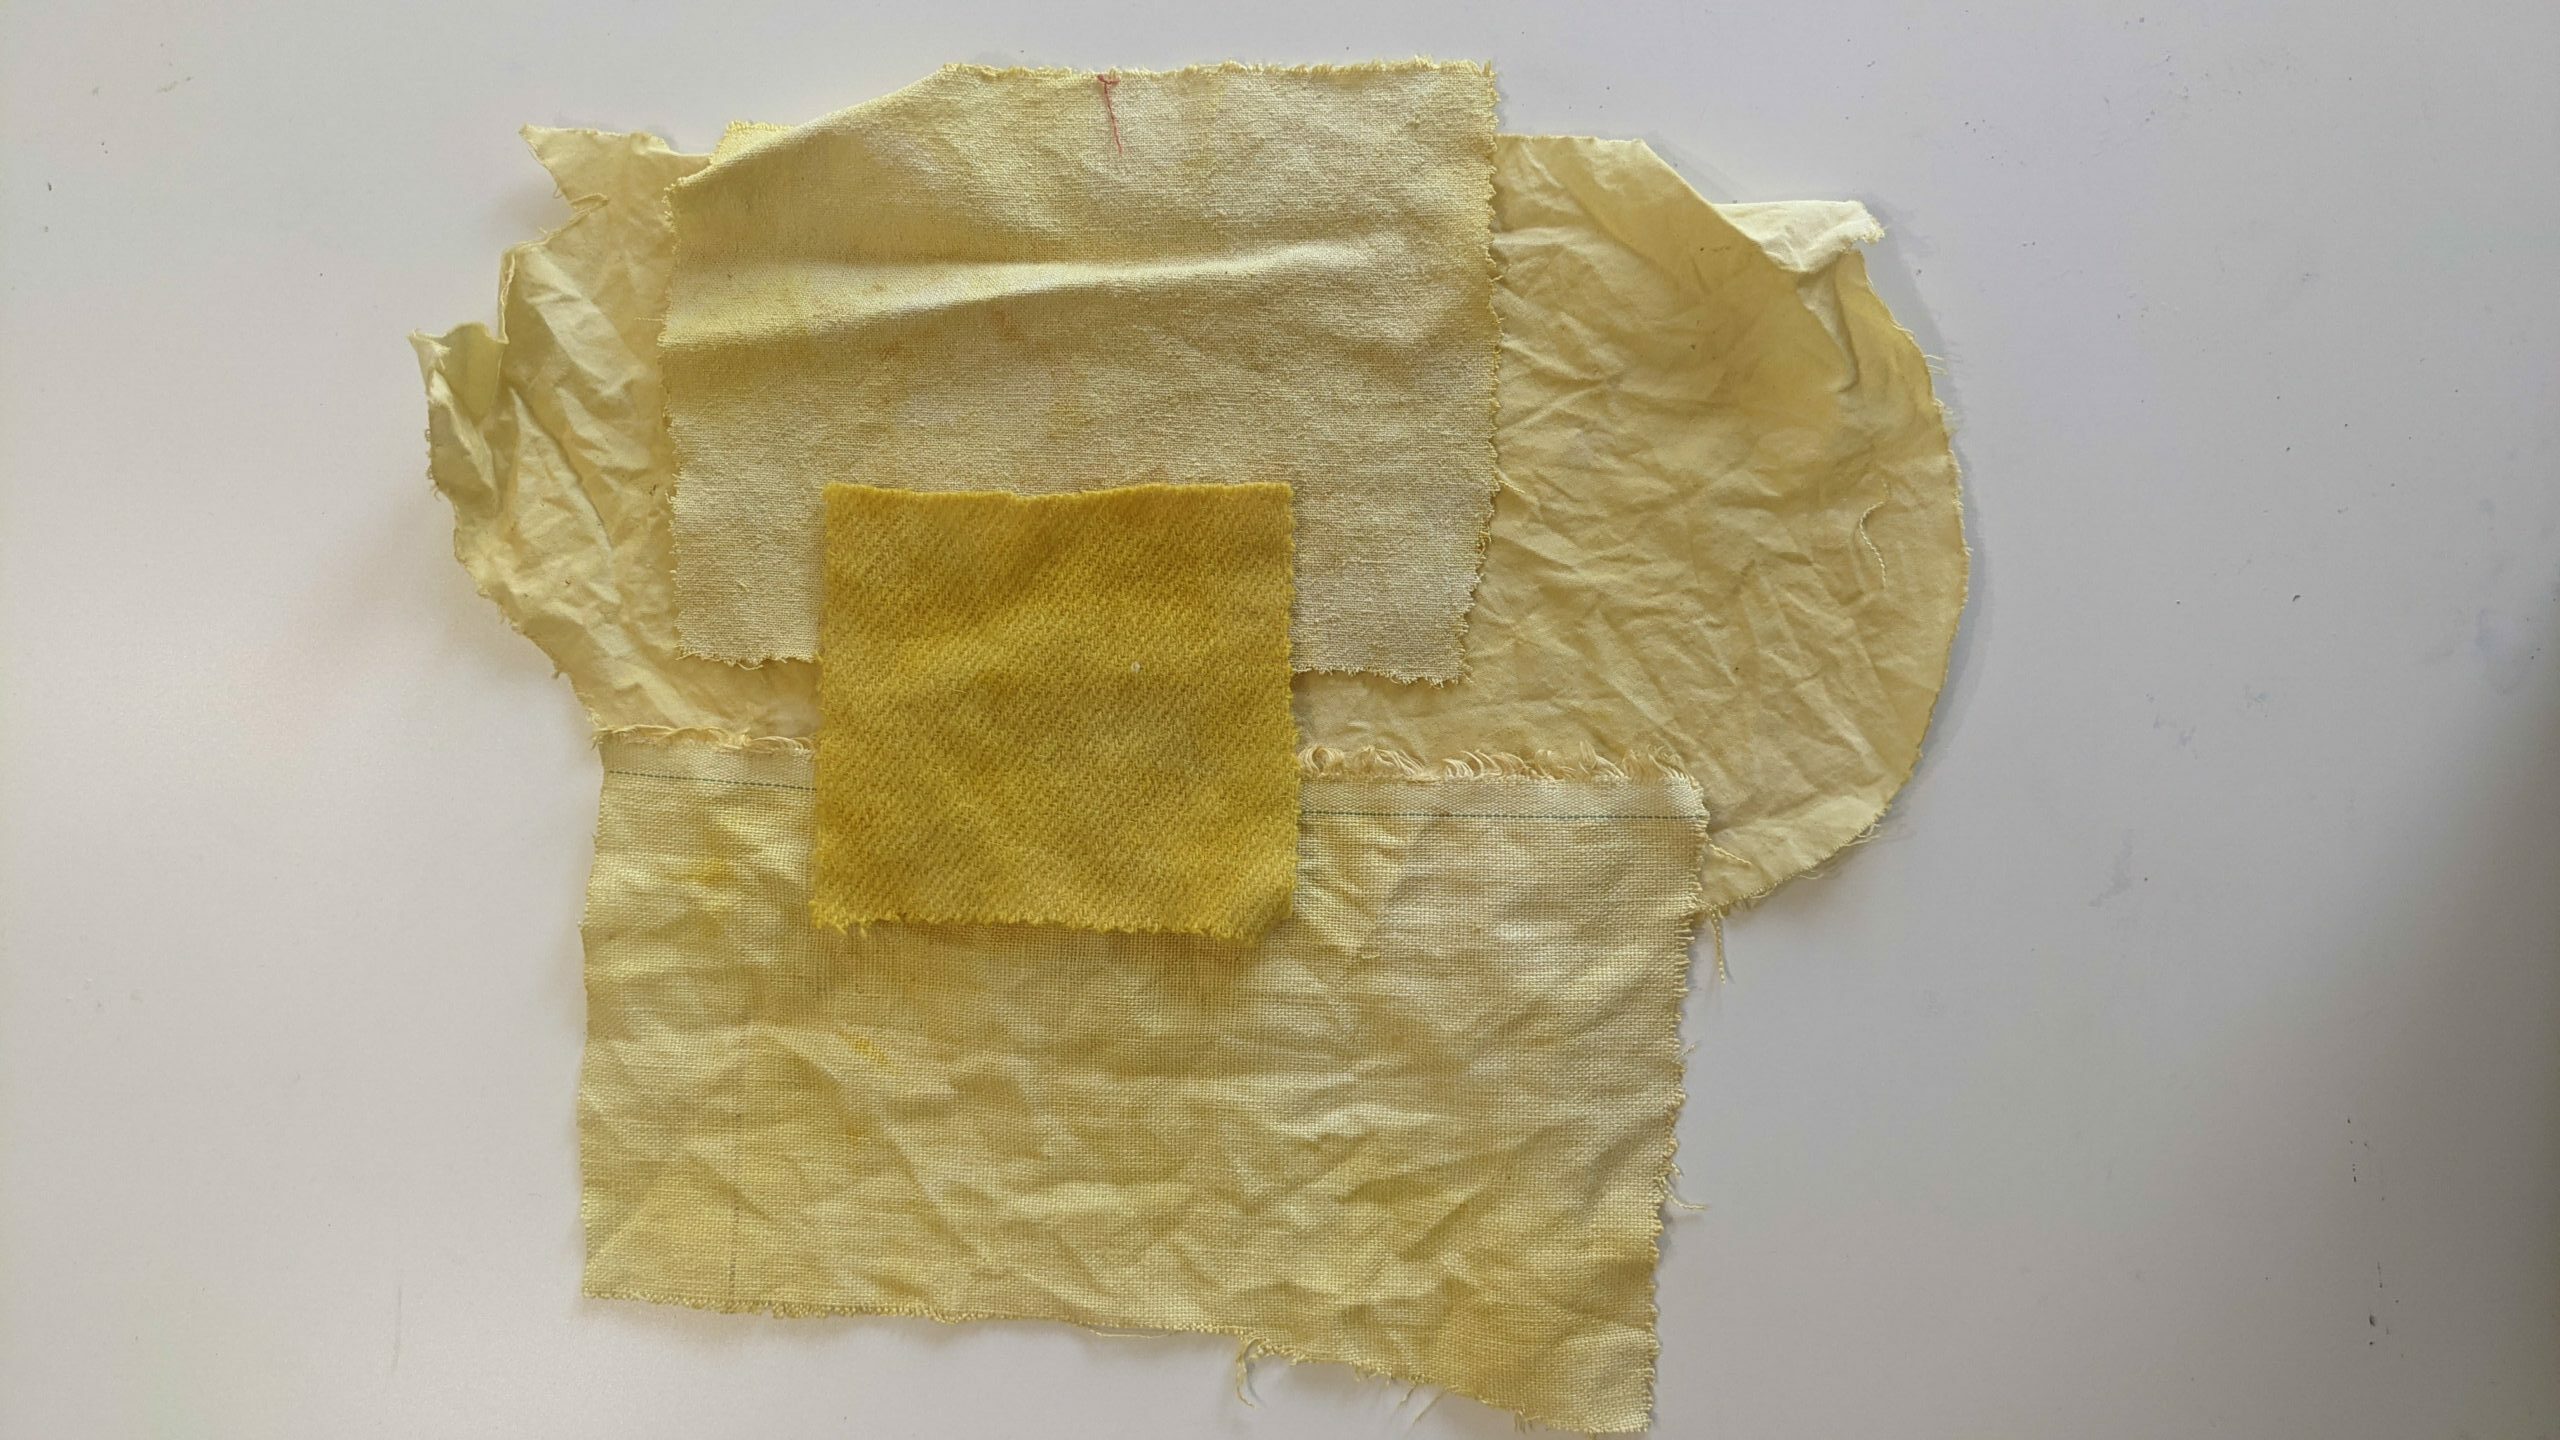 cream and yellow fabric samples - naturally dyed